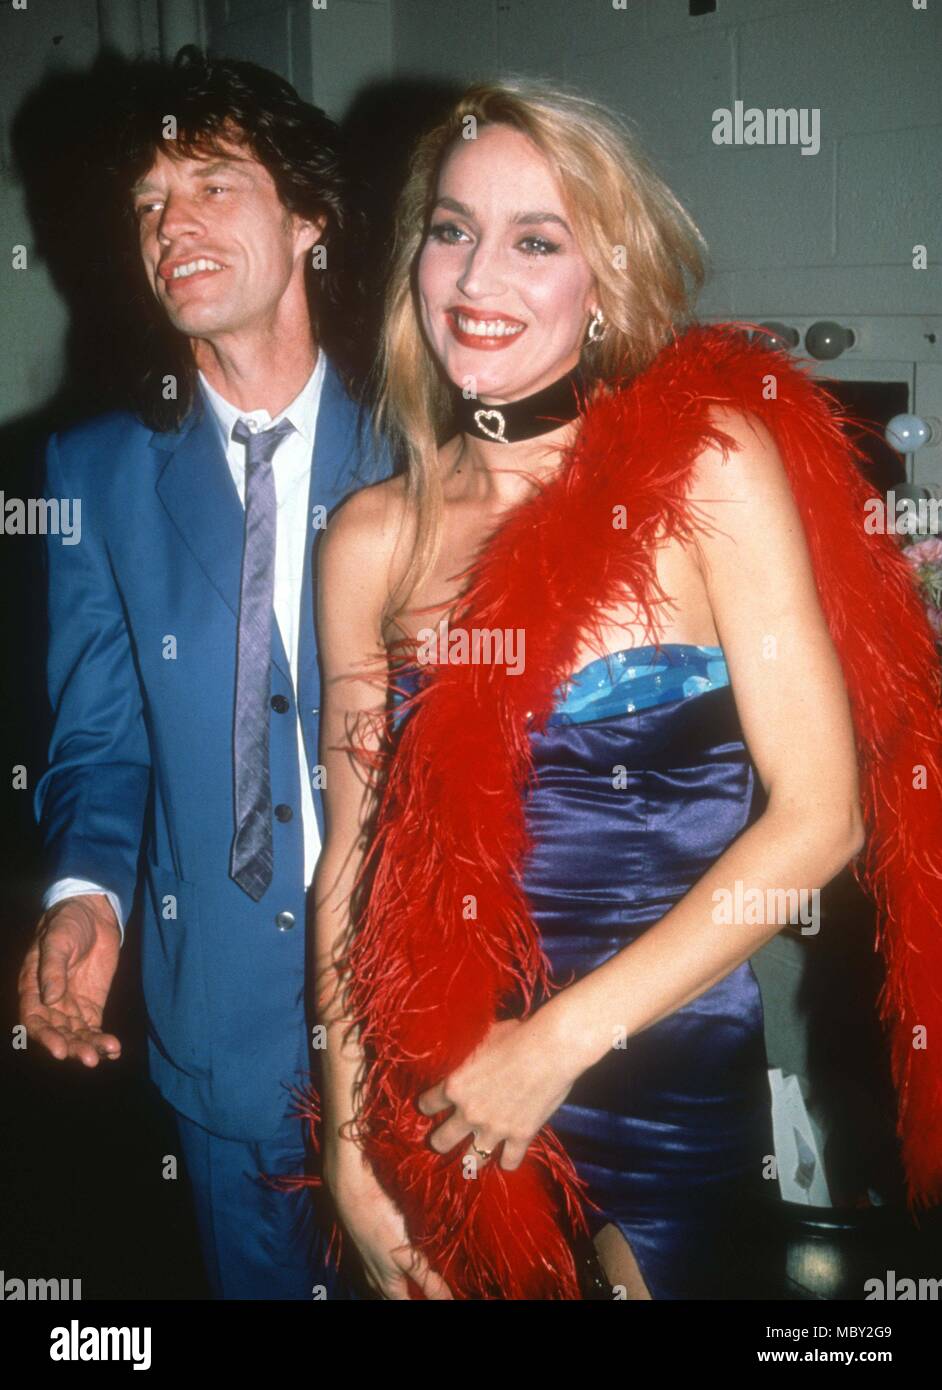 Mick Jagger Jerry Hall 1992 Photo By Adam Scull/PHOTOlink.net Stock Photo